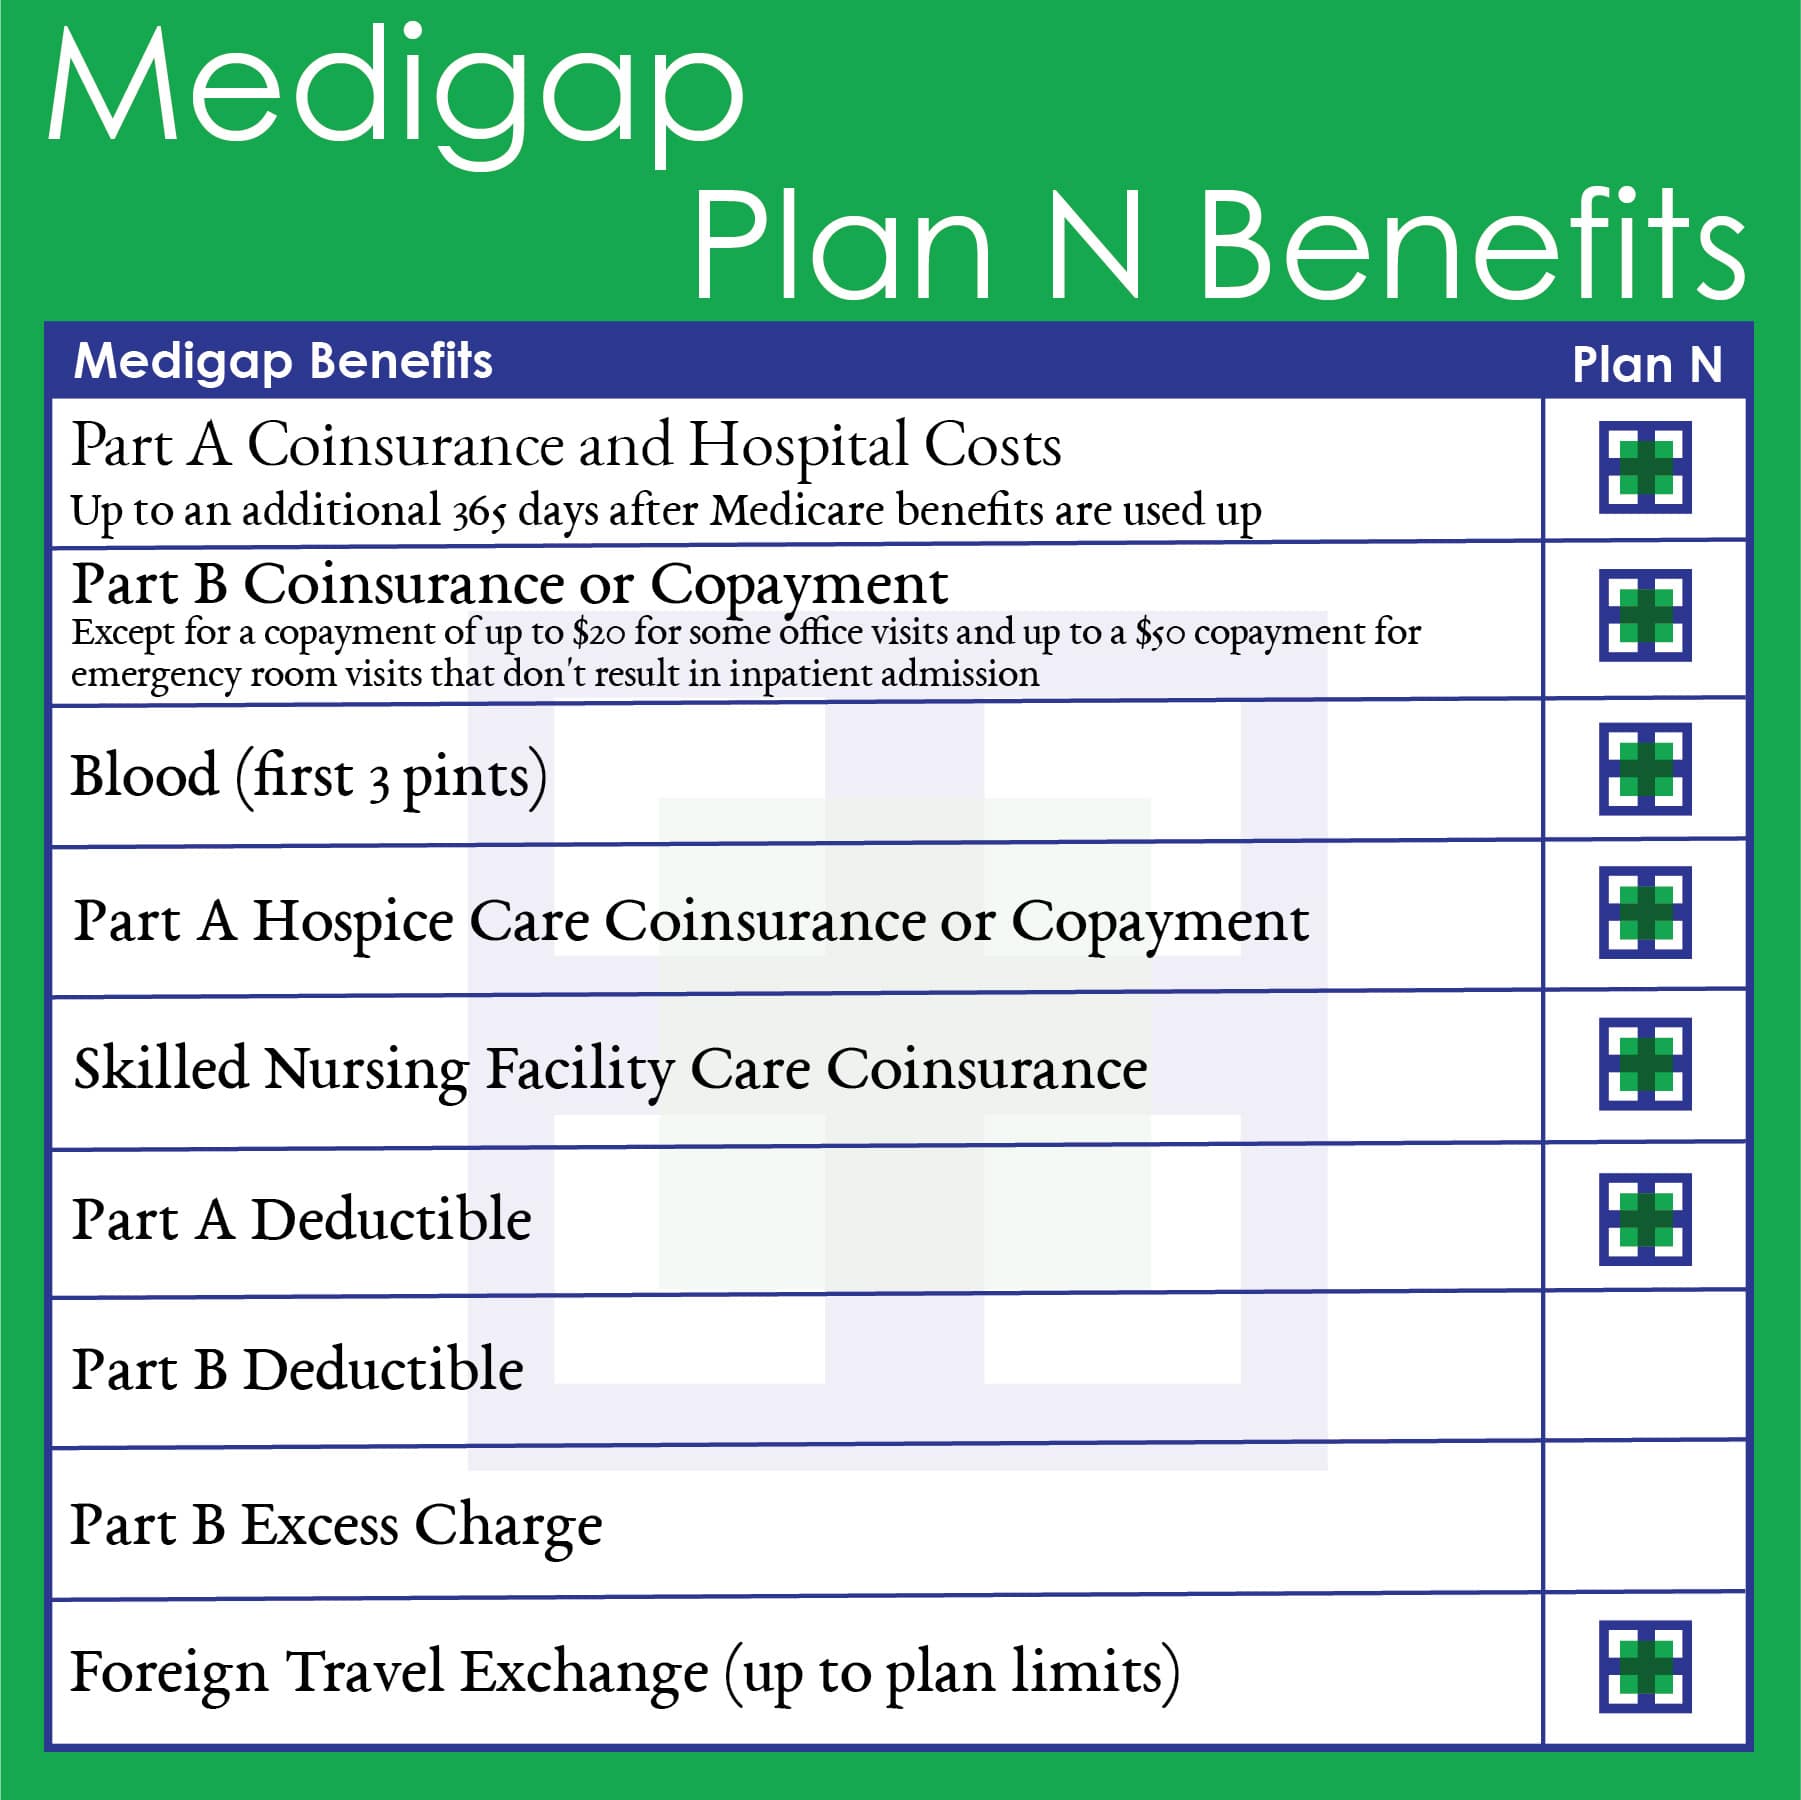 How Many Medigap Plans Are There, skilled nursing facility, medicare supplement plans